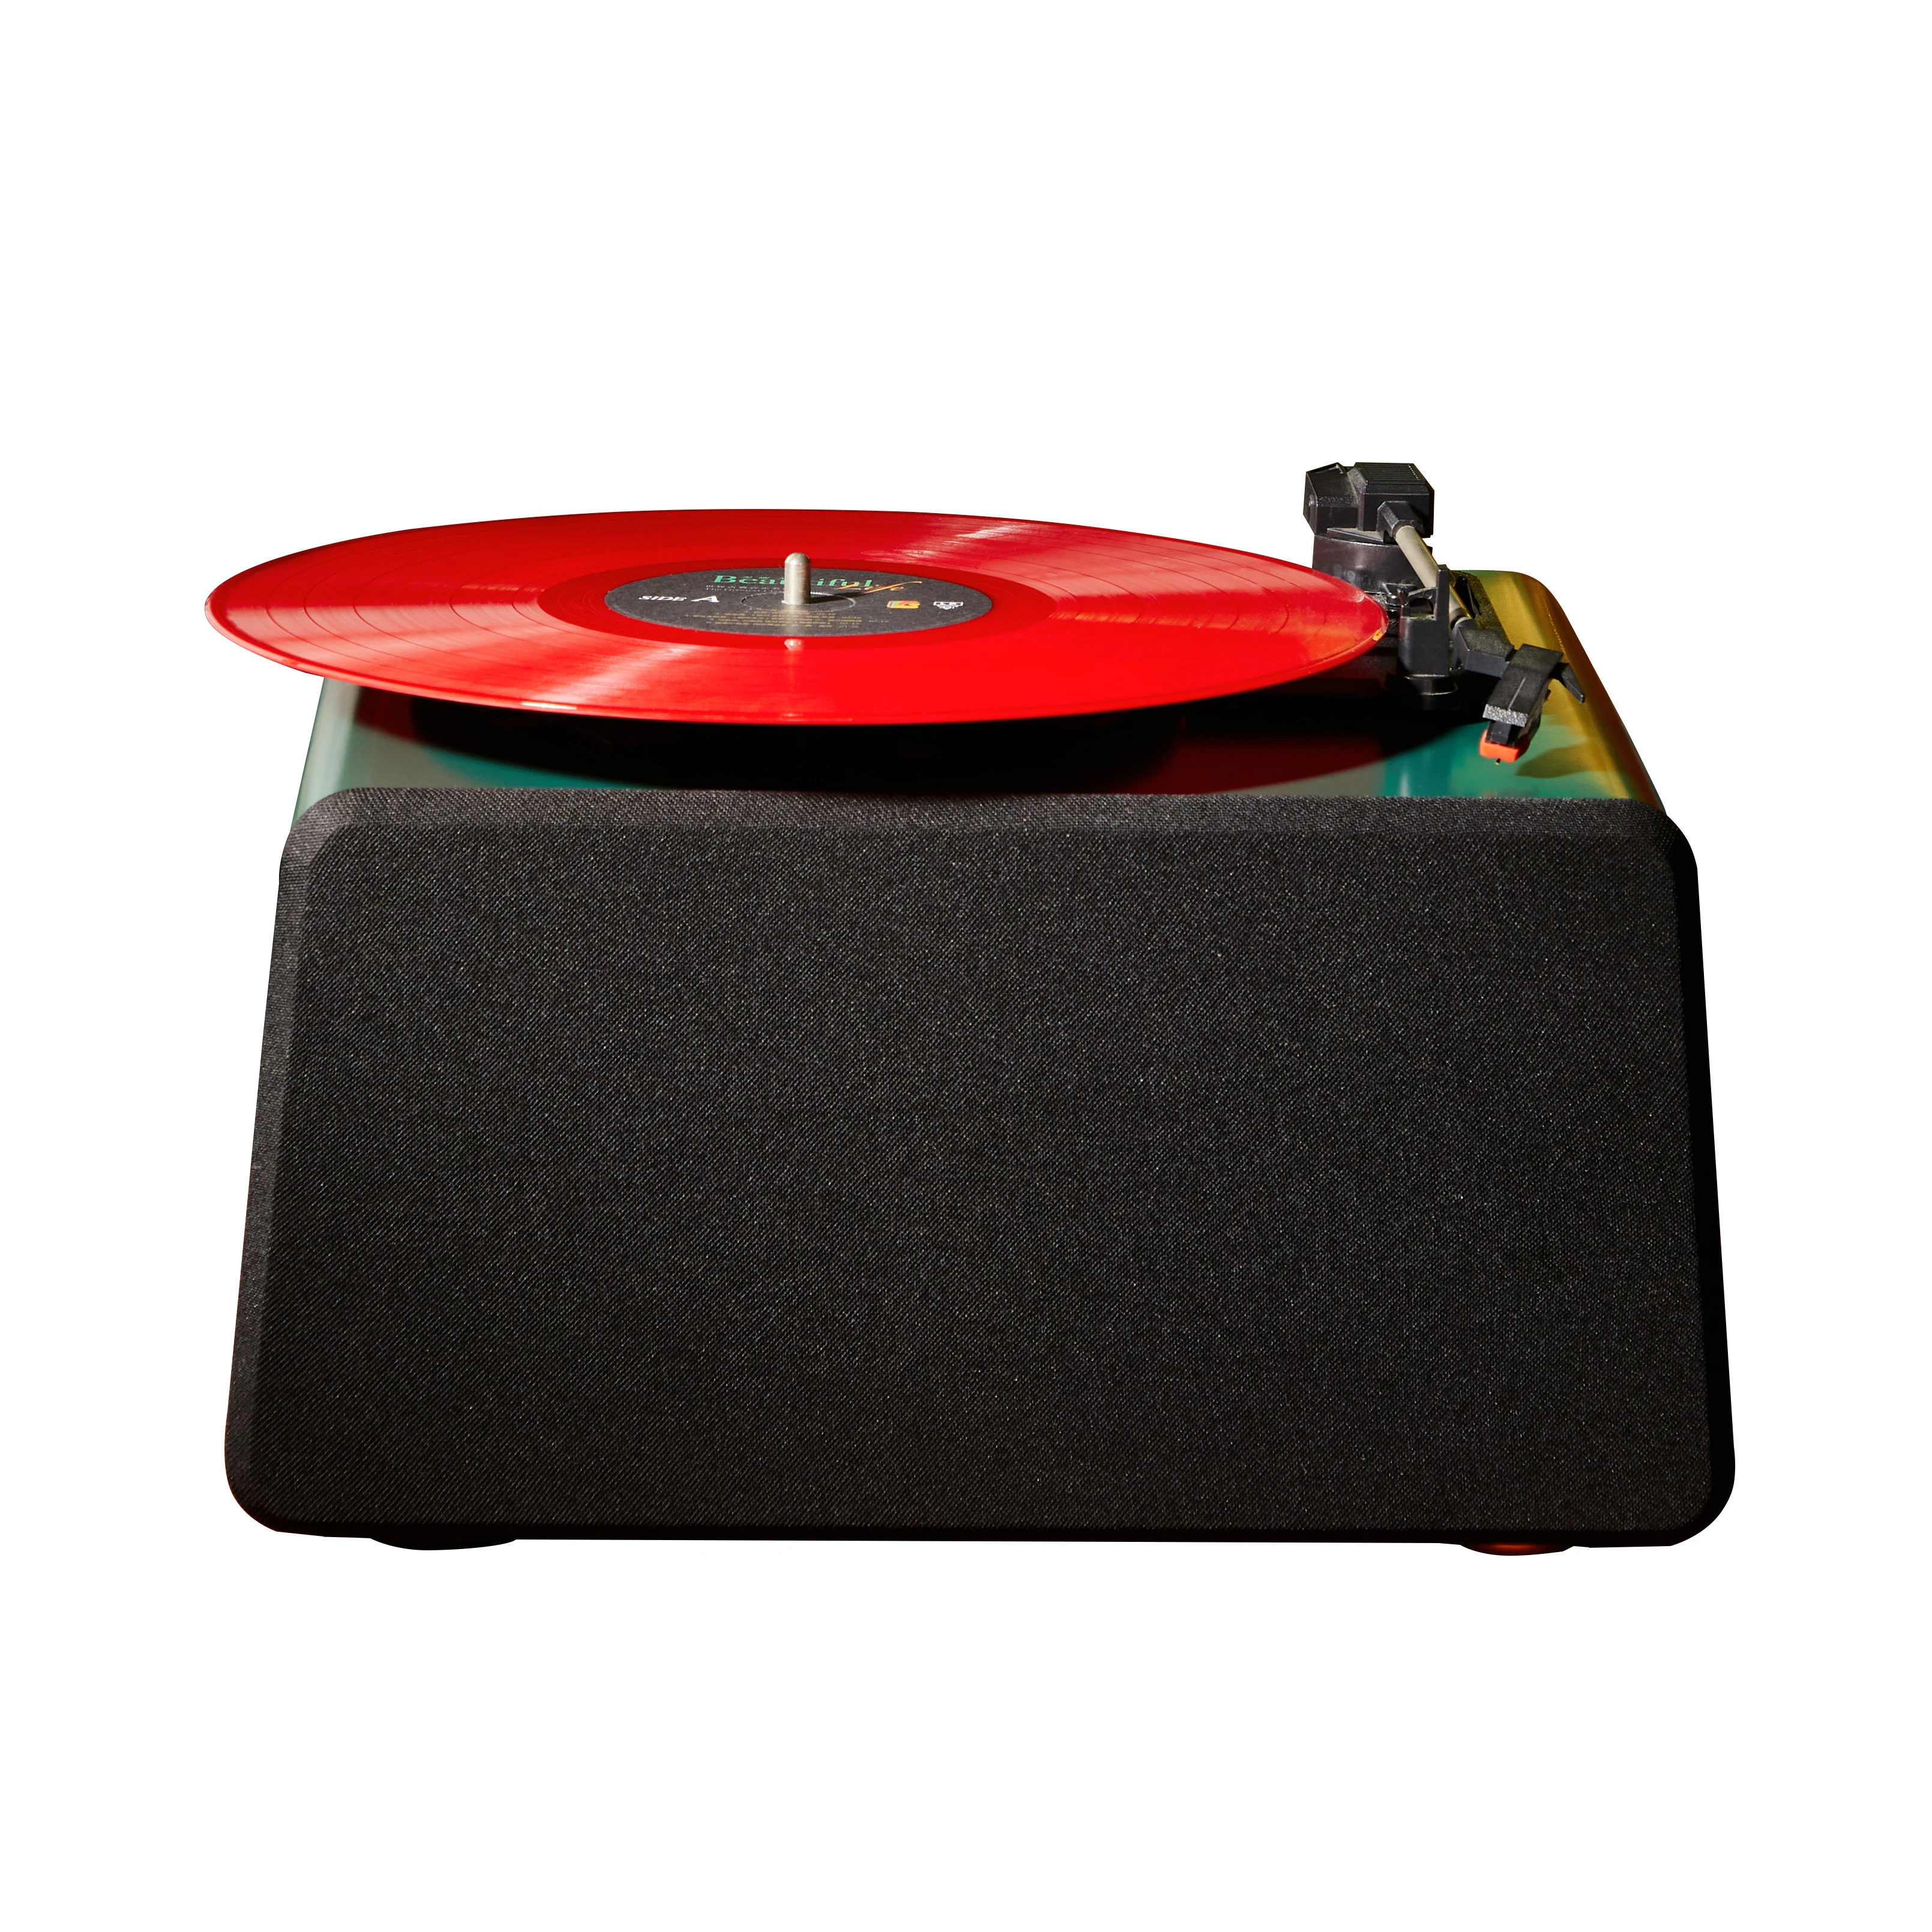 

Record Player Turntable Wireless Portable LP Phonograph with Built in Stereo Speakers 3-Speed Belt-Drive Turntable Vinyl Player